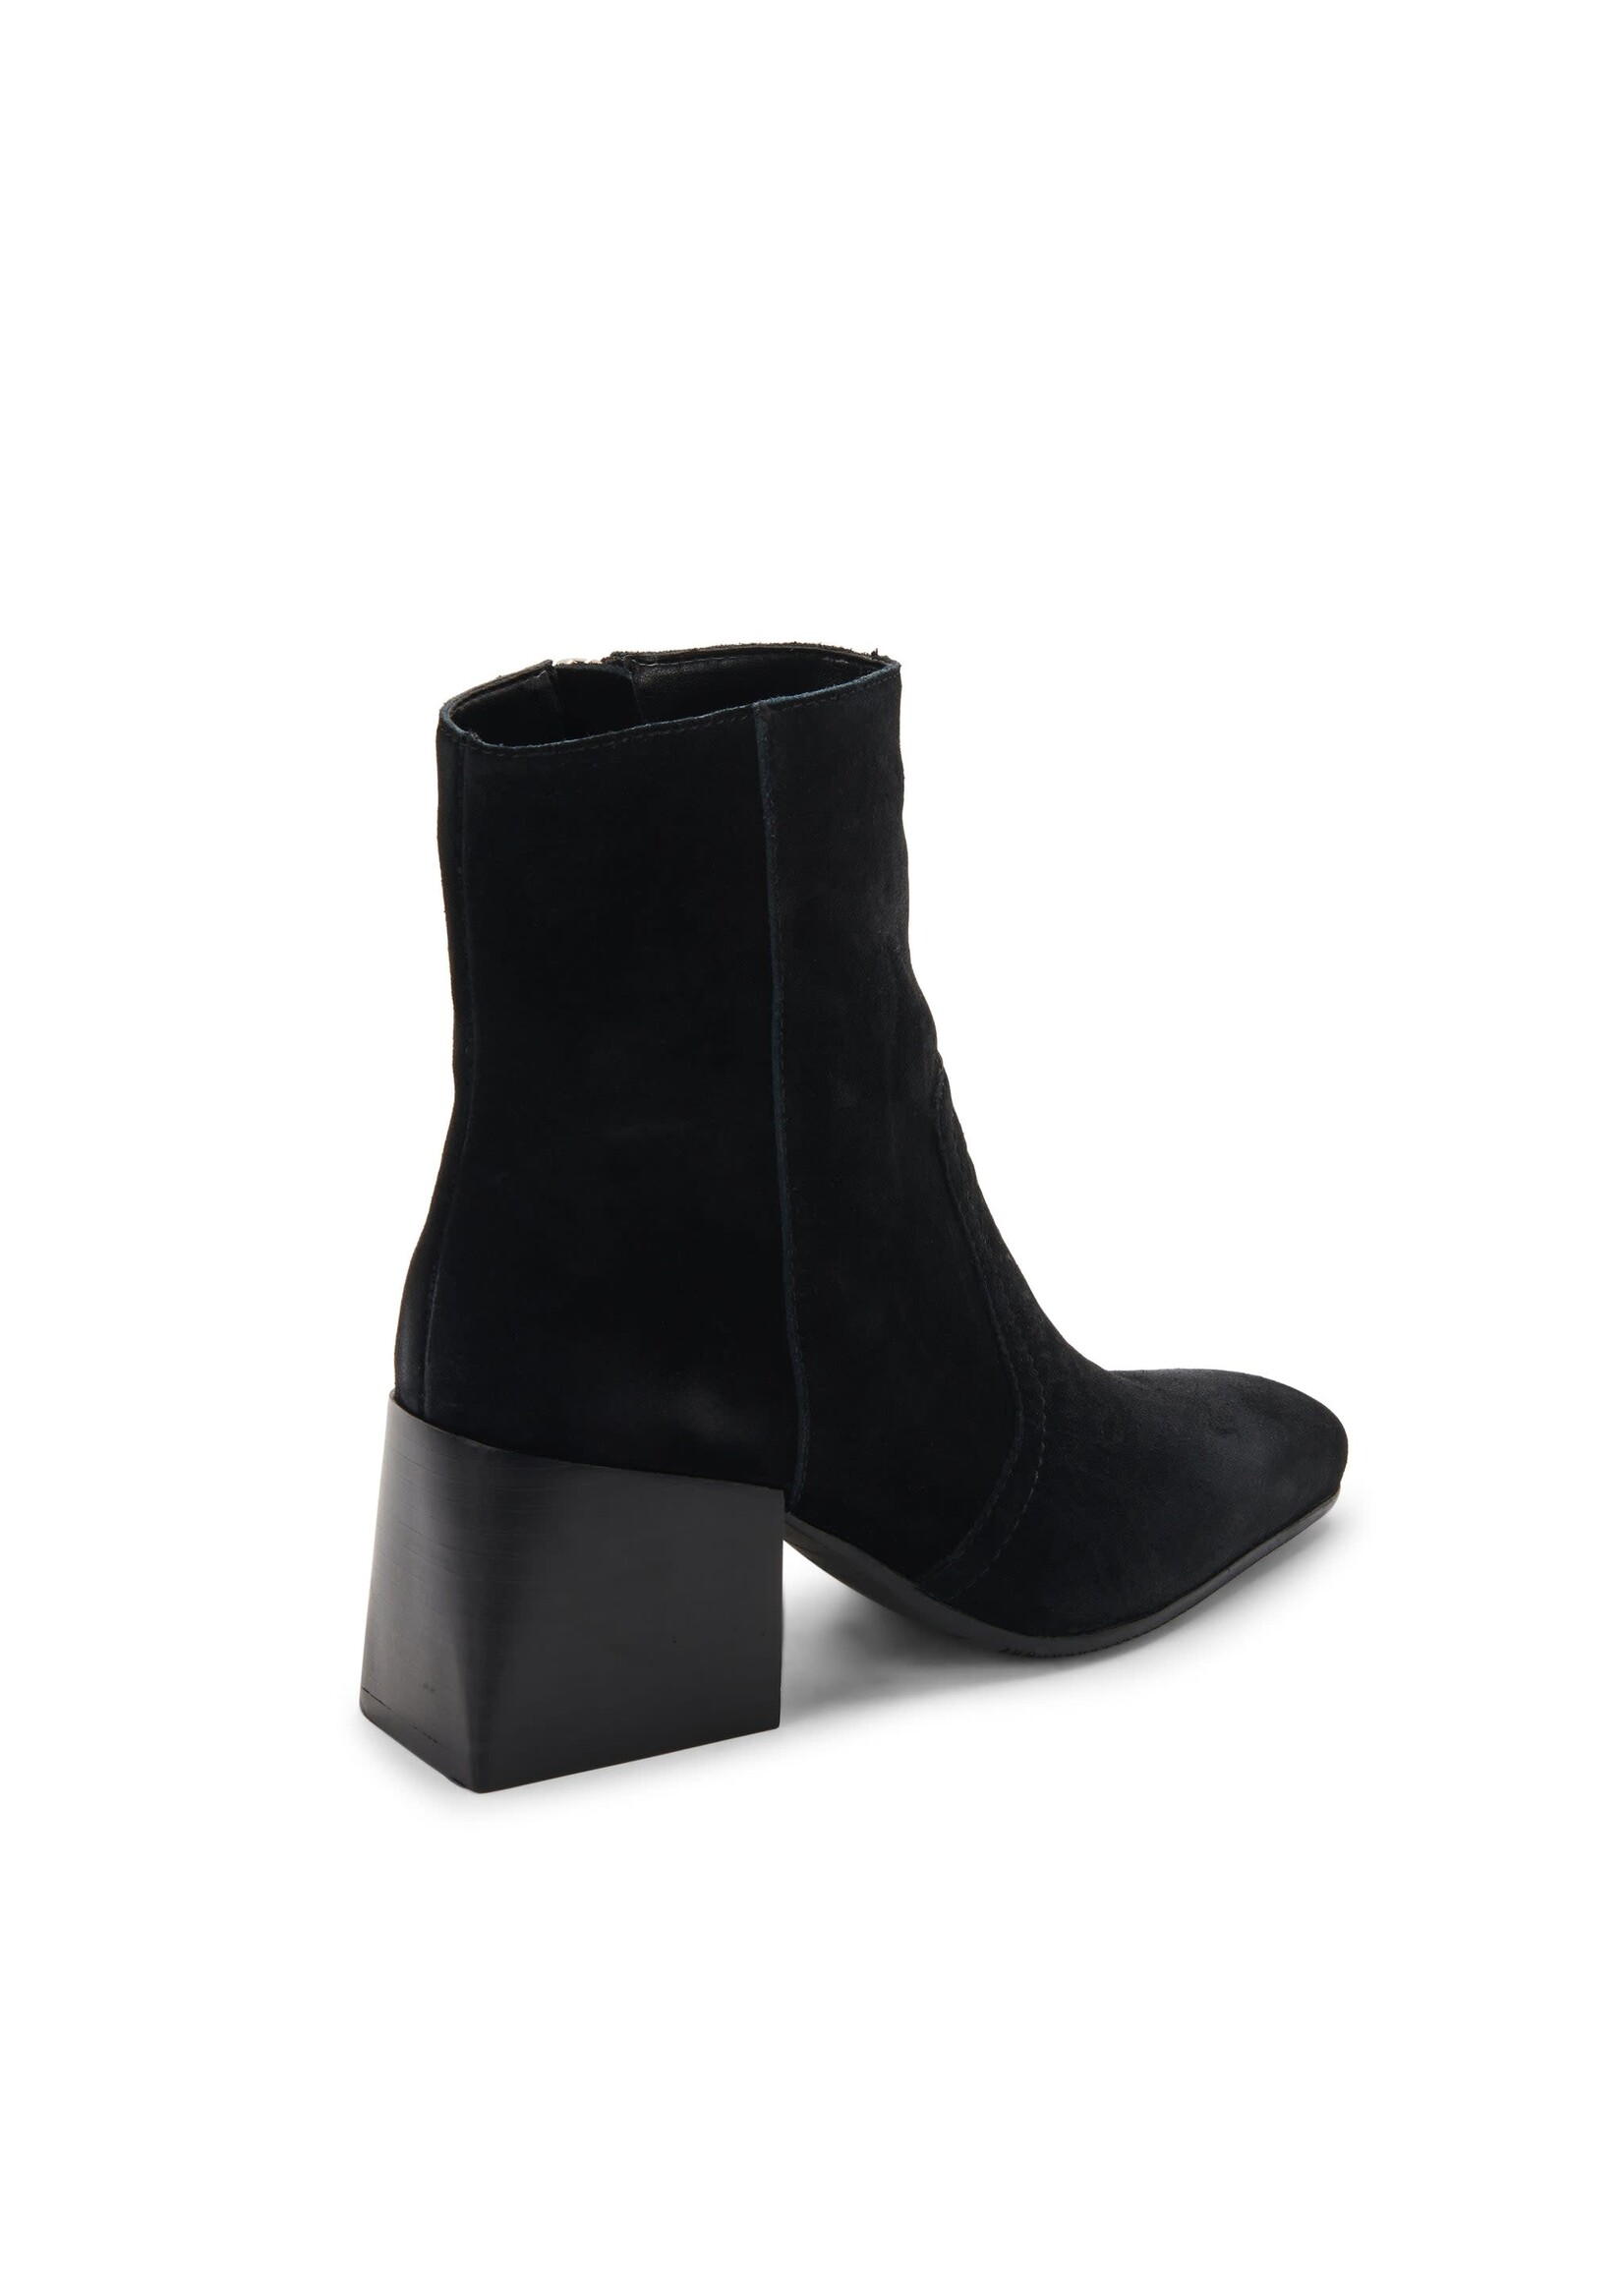 Blondo Salome Black Suede Boots by Blondo Water proof Size 11 Only